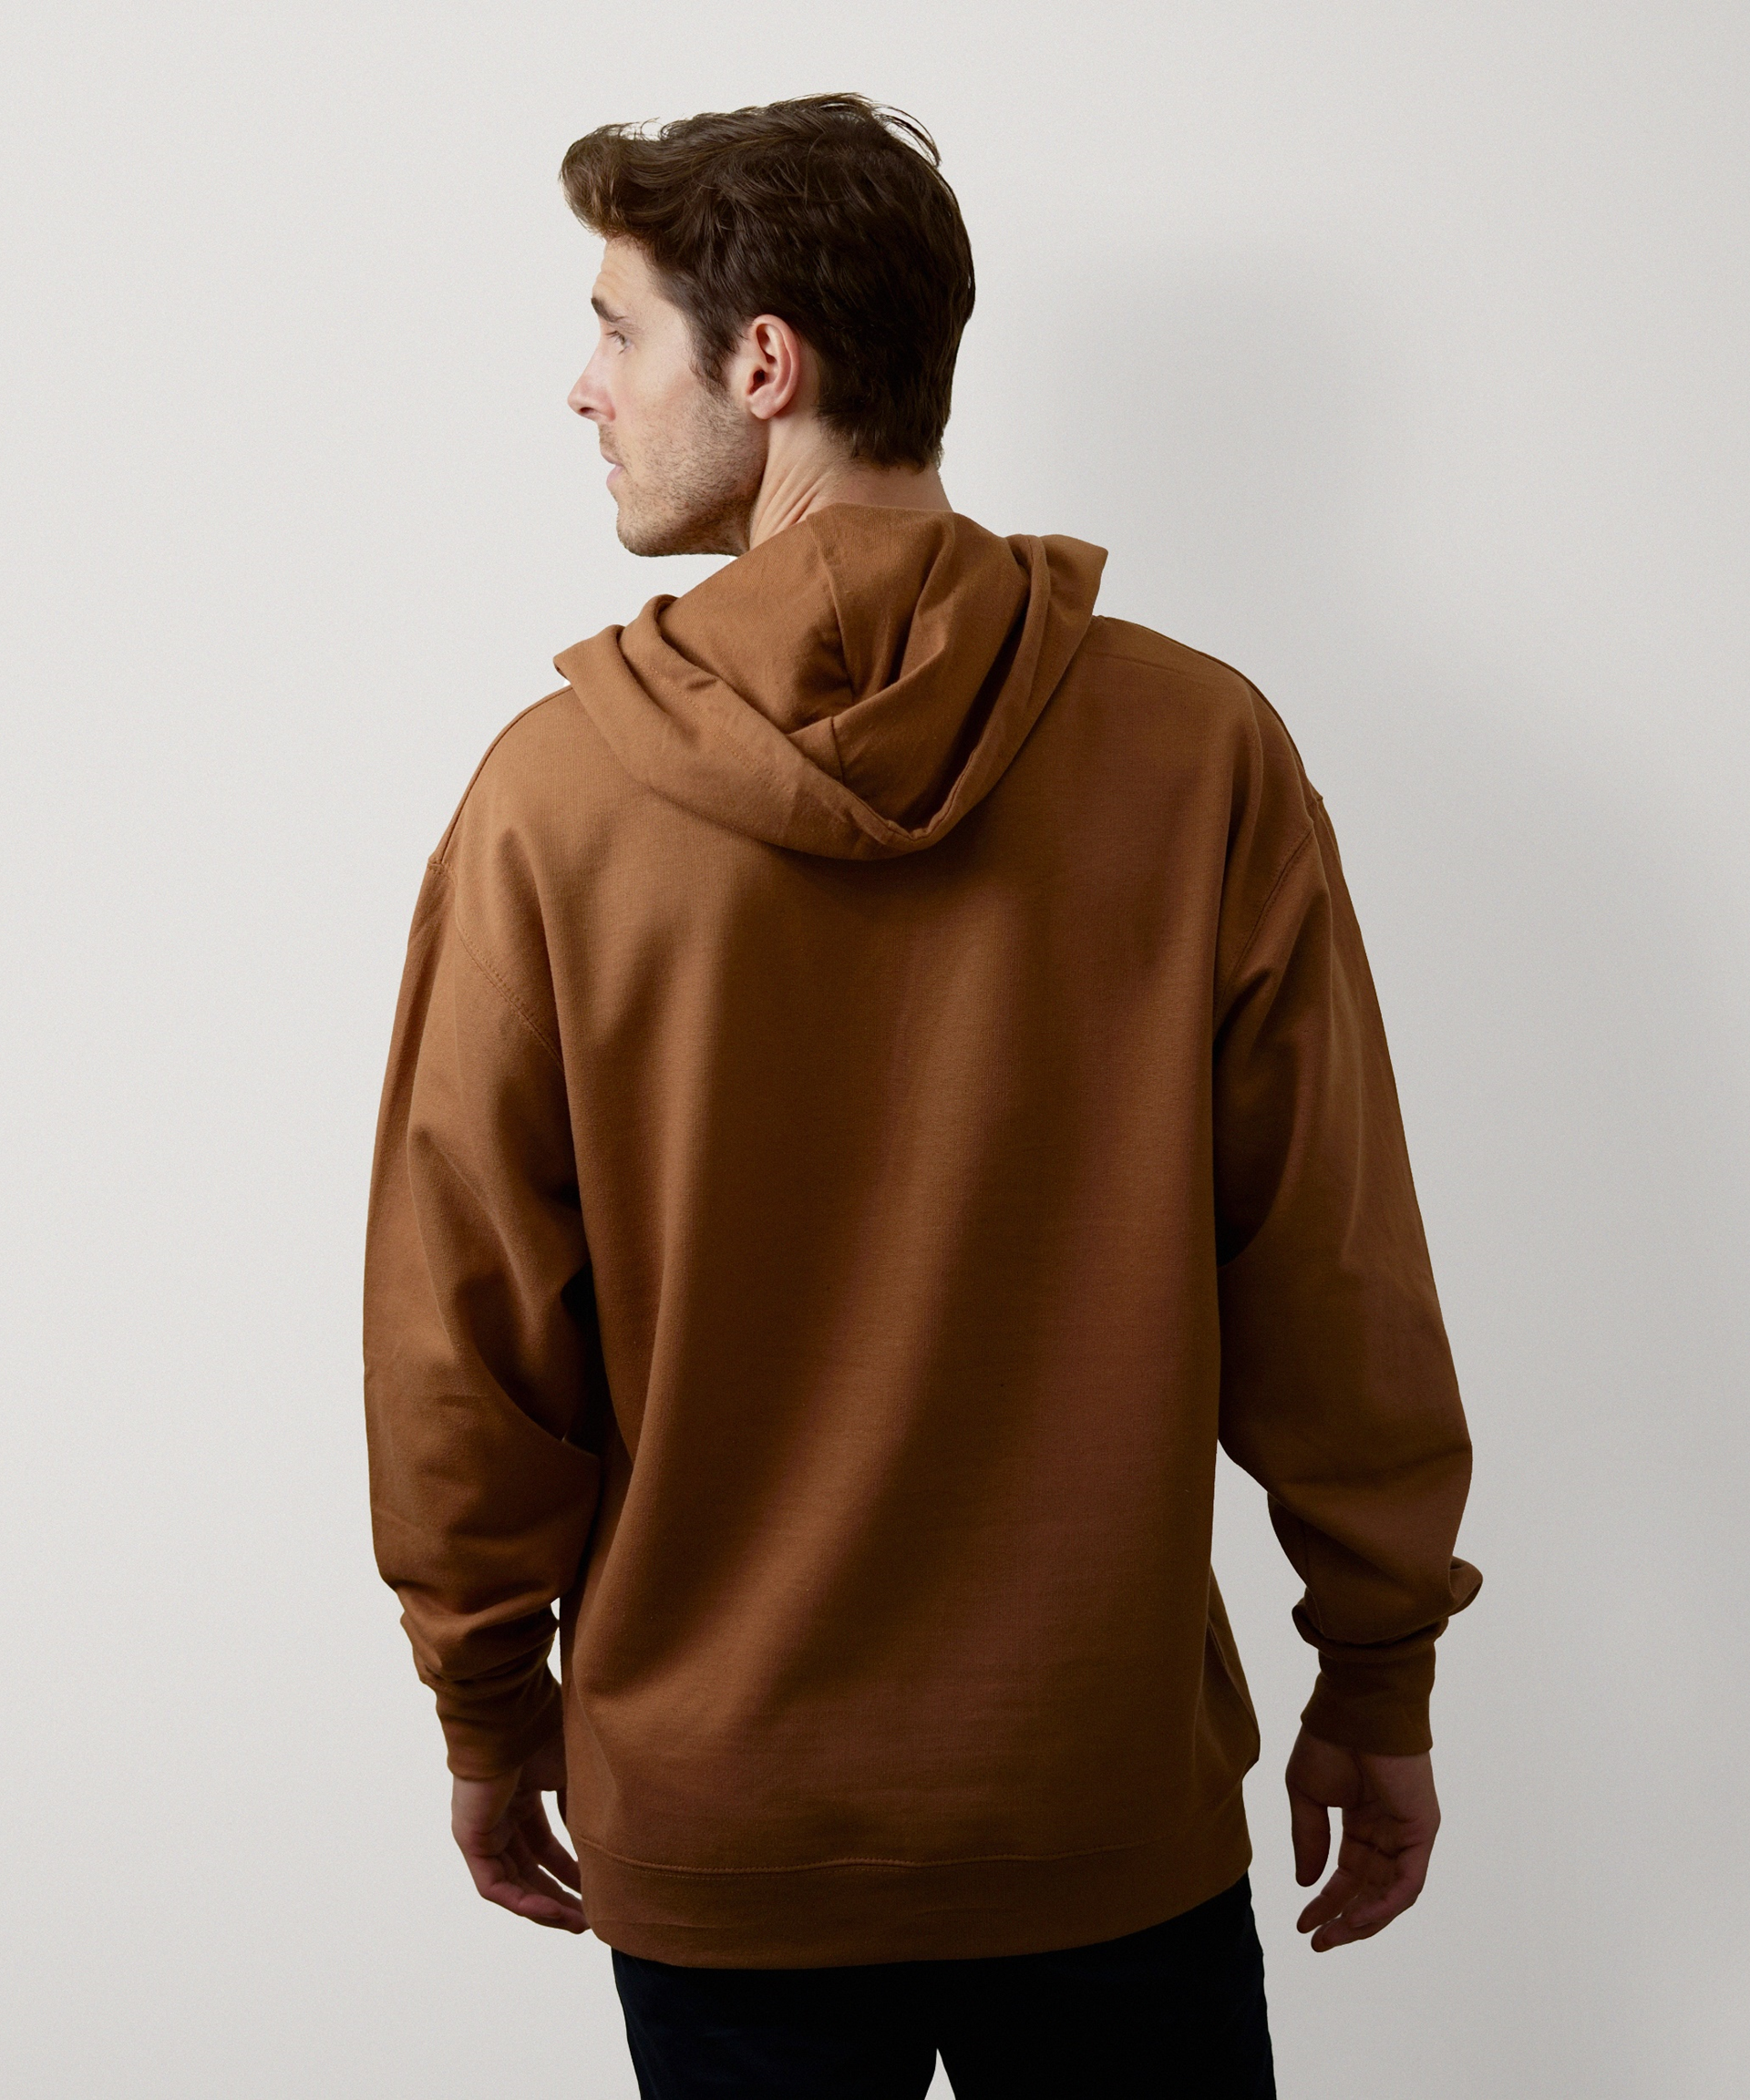 Signature Pullover Hoodie for Men (Saddle)